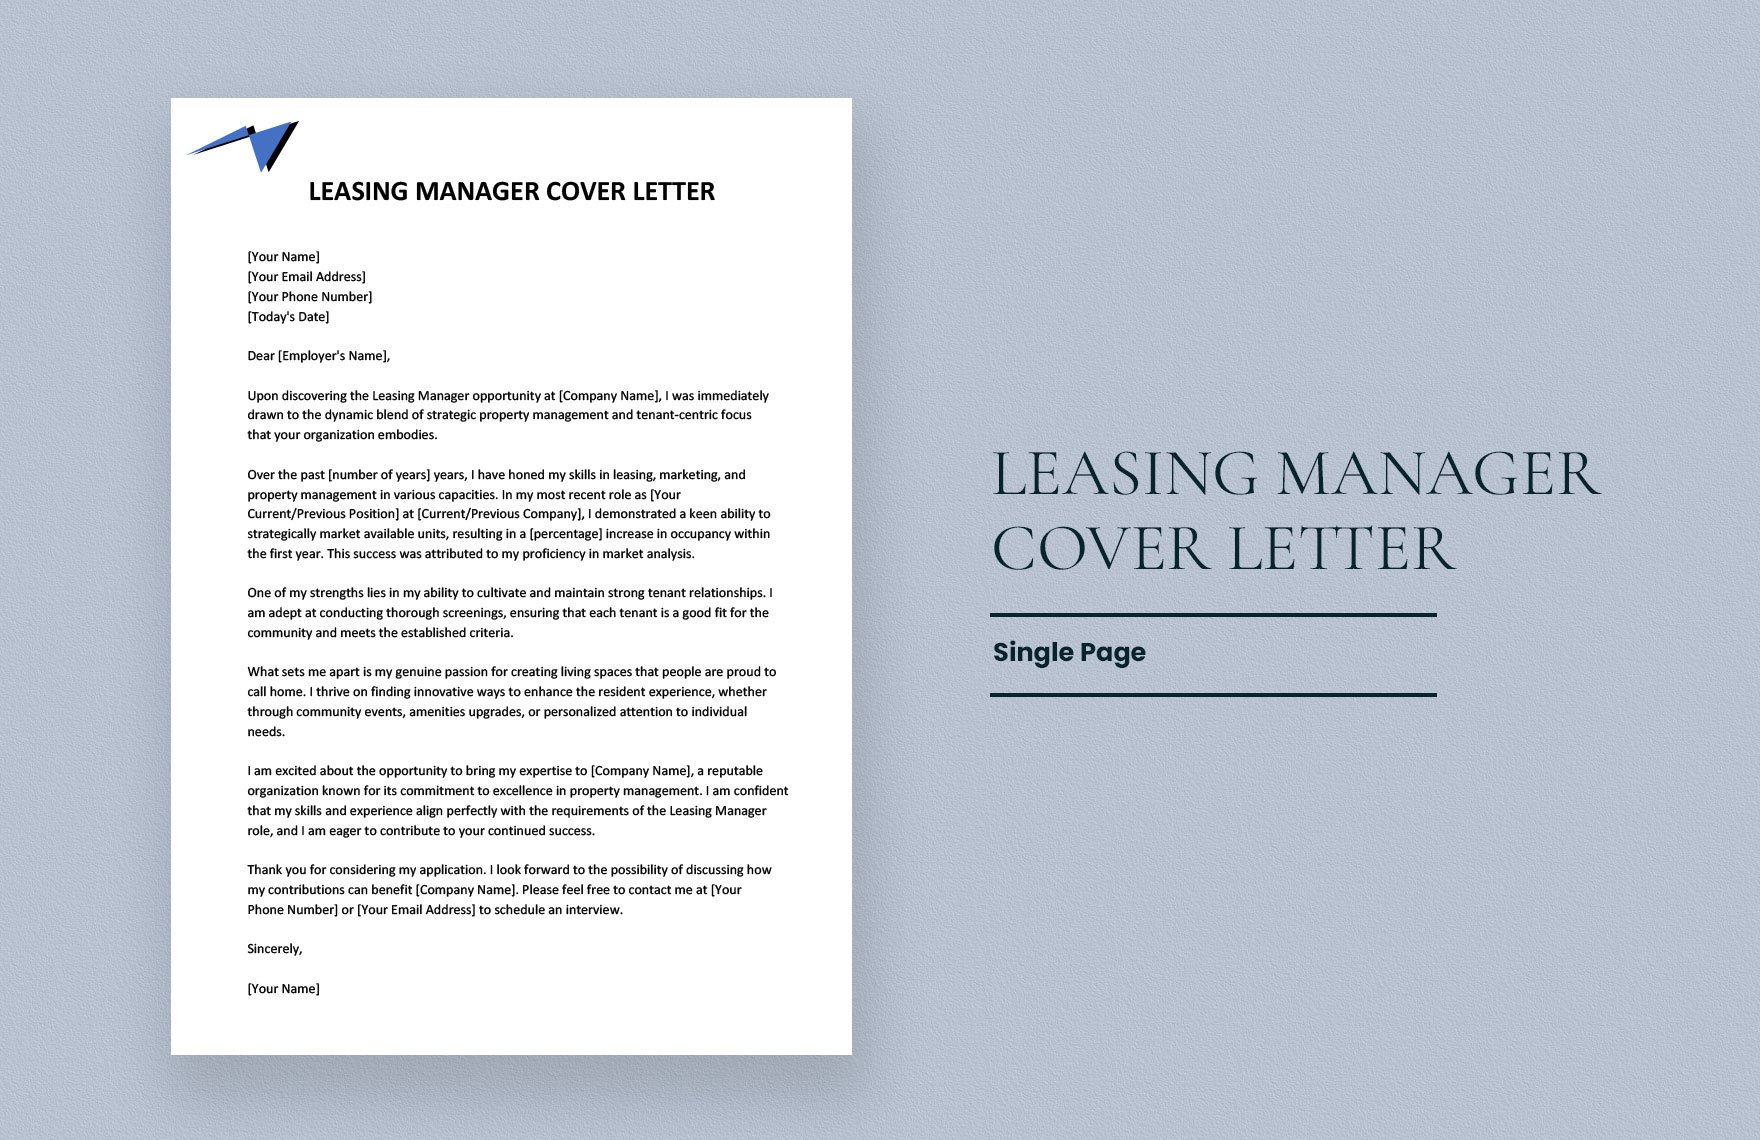 Leasing Manager Cover Letter